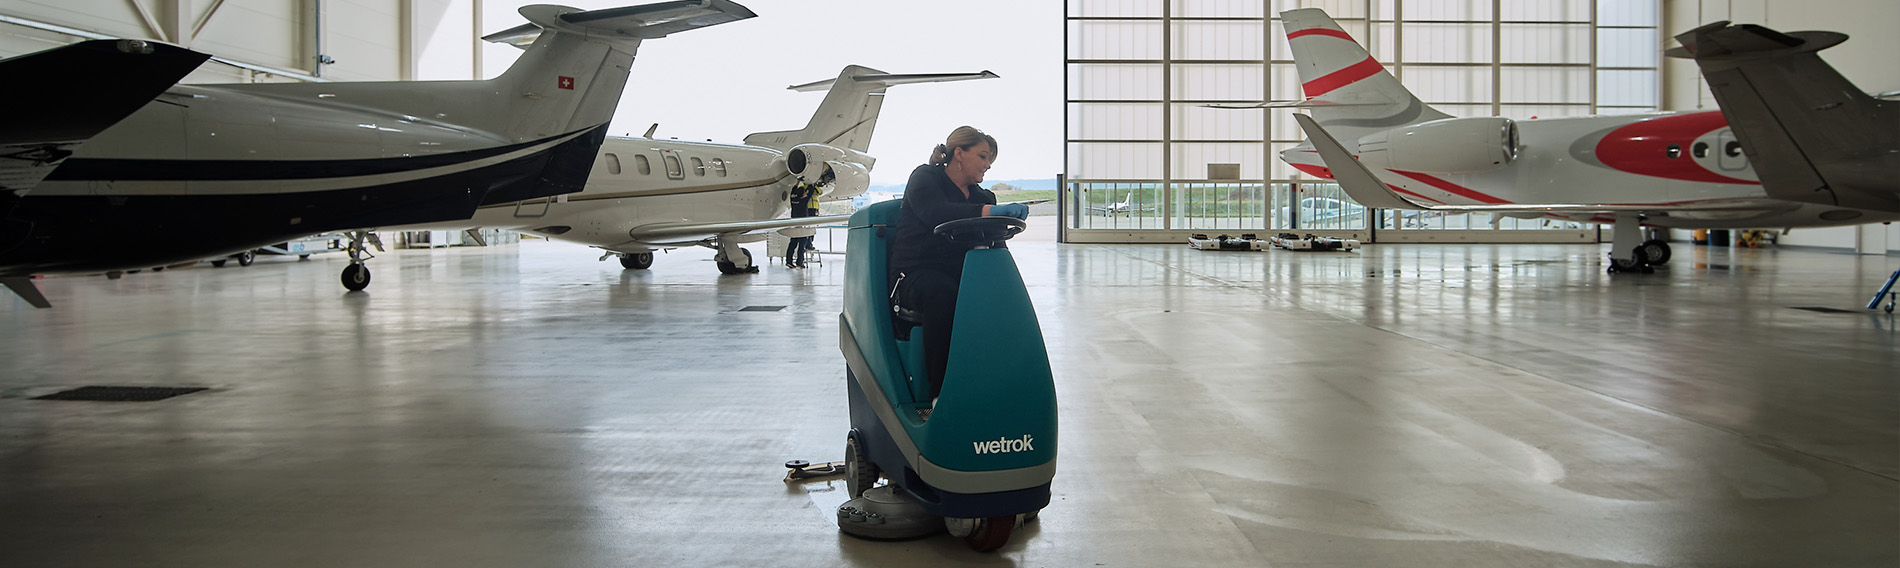 Floor cleaning aviation industry